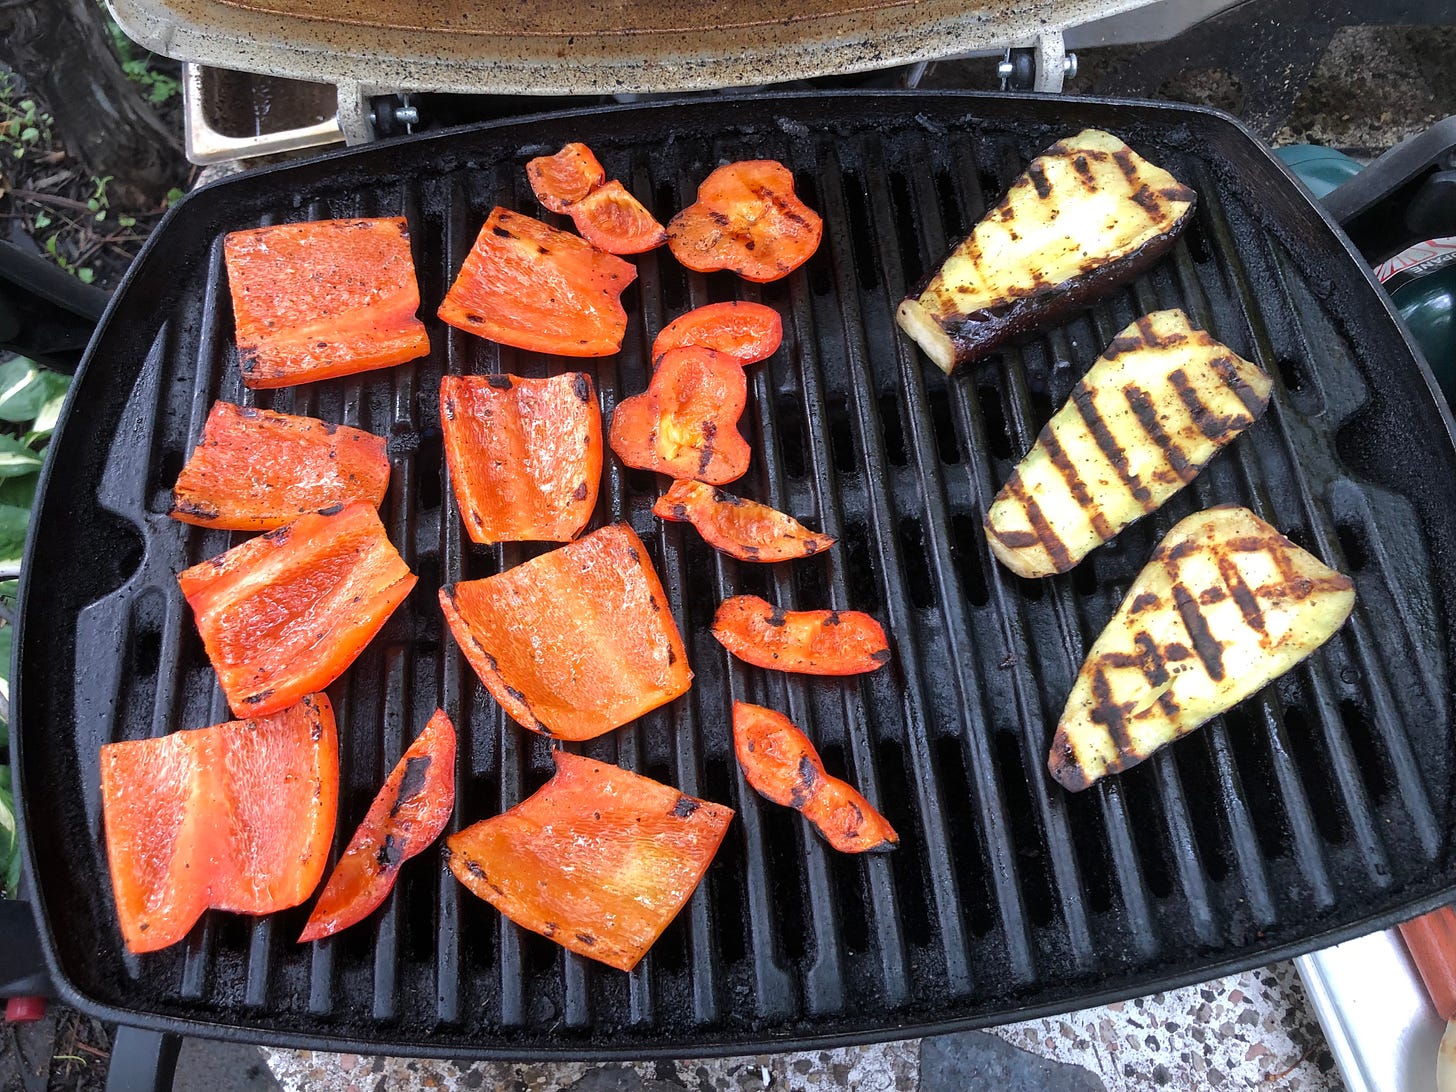 Slices of red pepper and eggplant on a small propane grill. Both vegetables have moderate charring and look throughly cooked. 